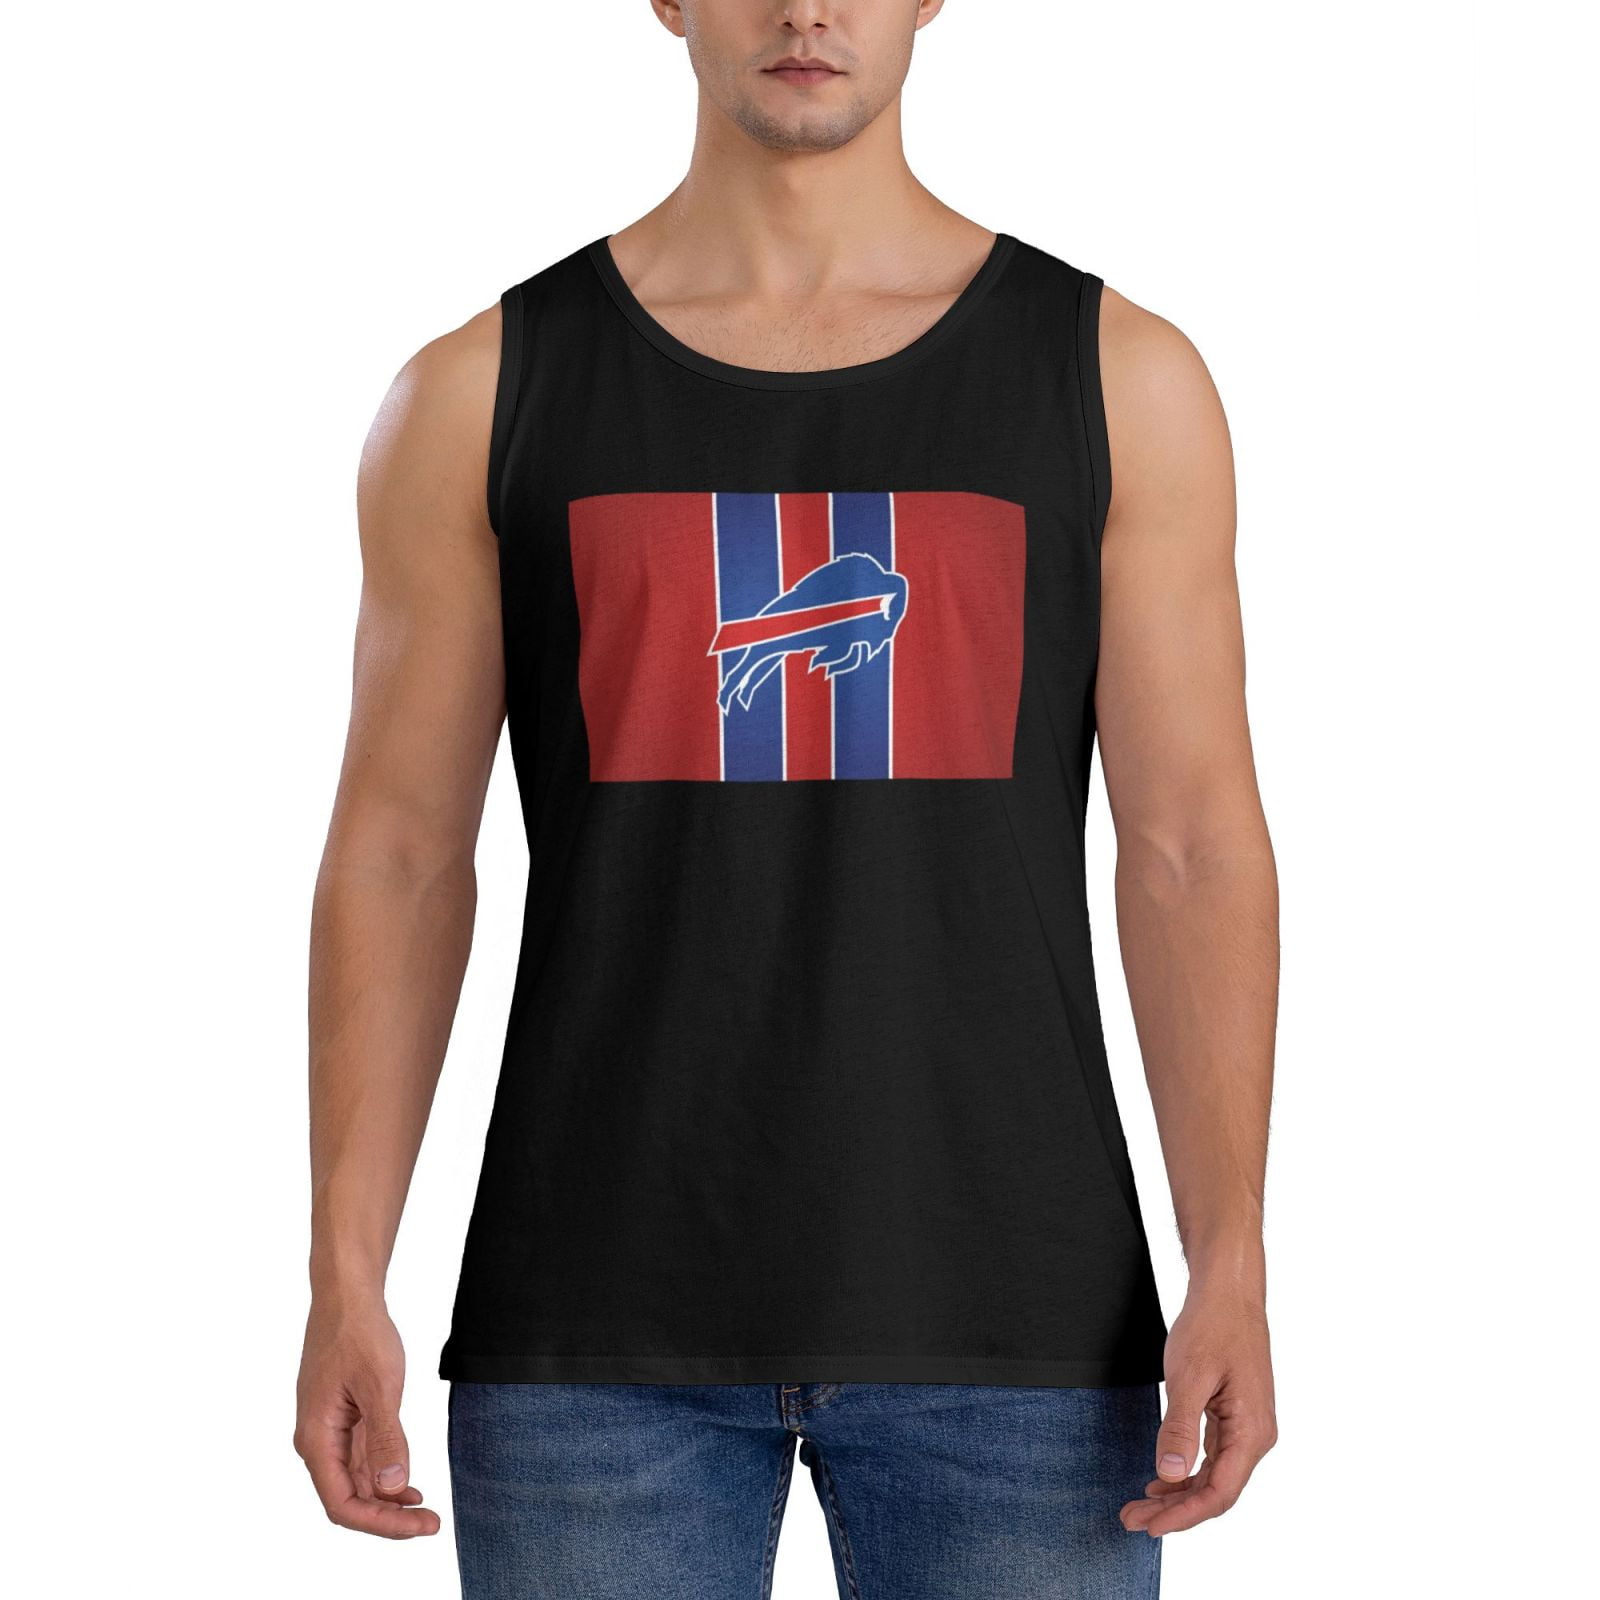 Buffalo-Bills Men'S Tank Top Novelty Graphic Breathable Quick Dry ...